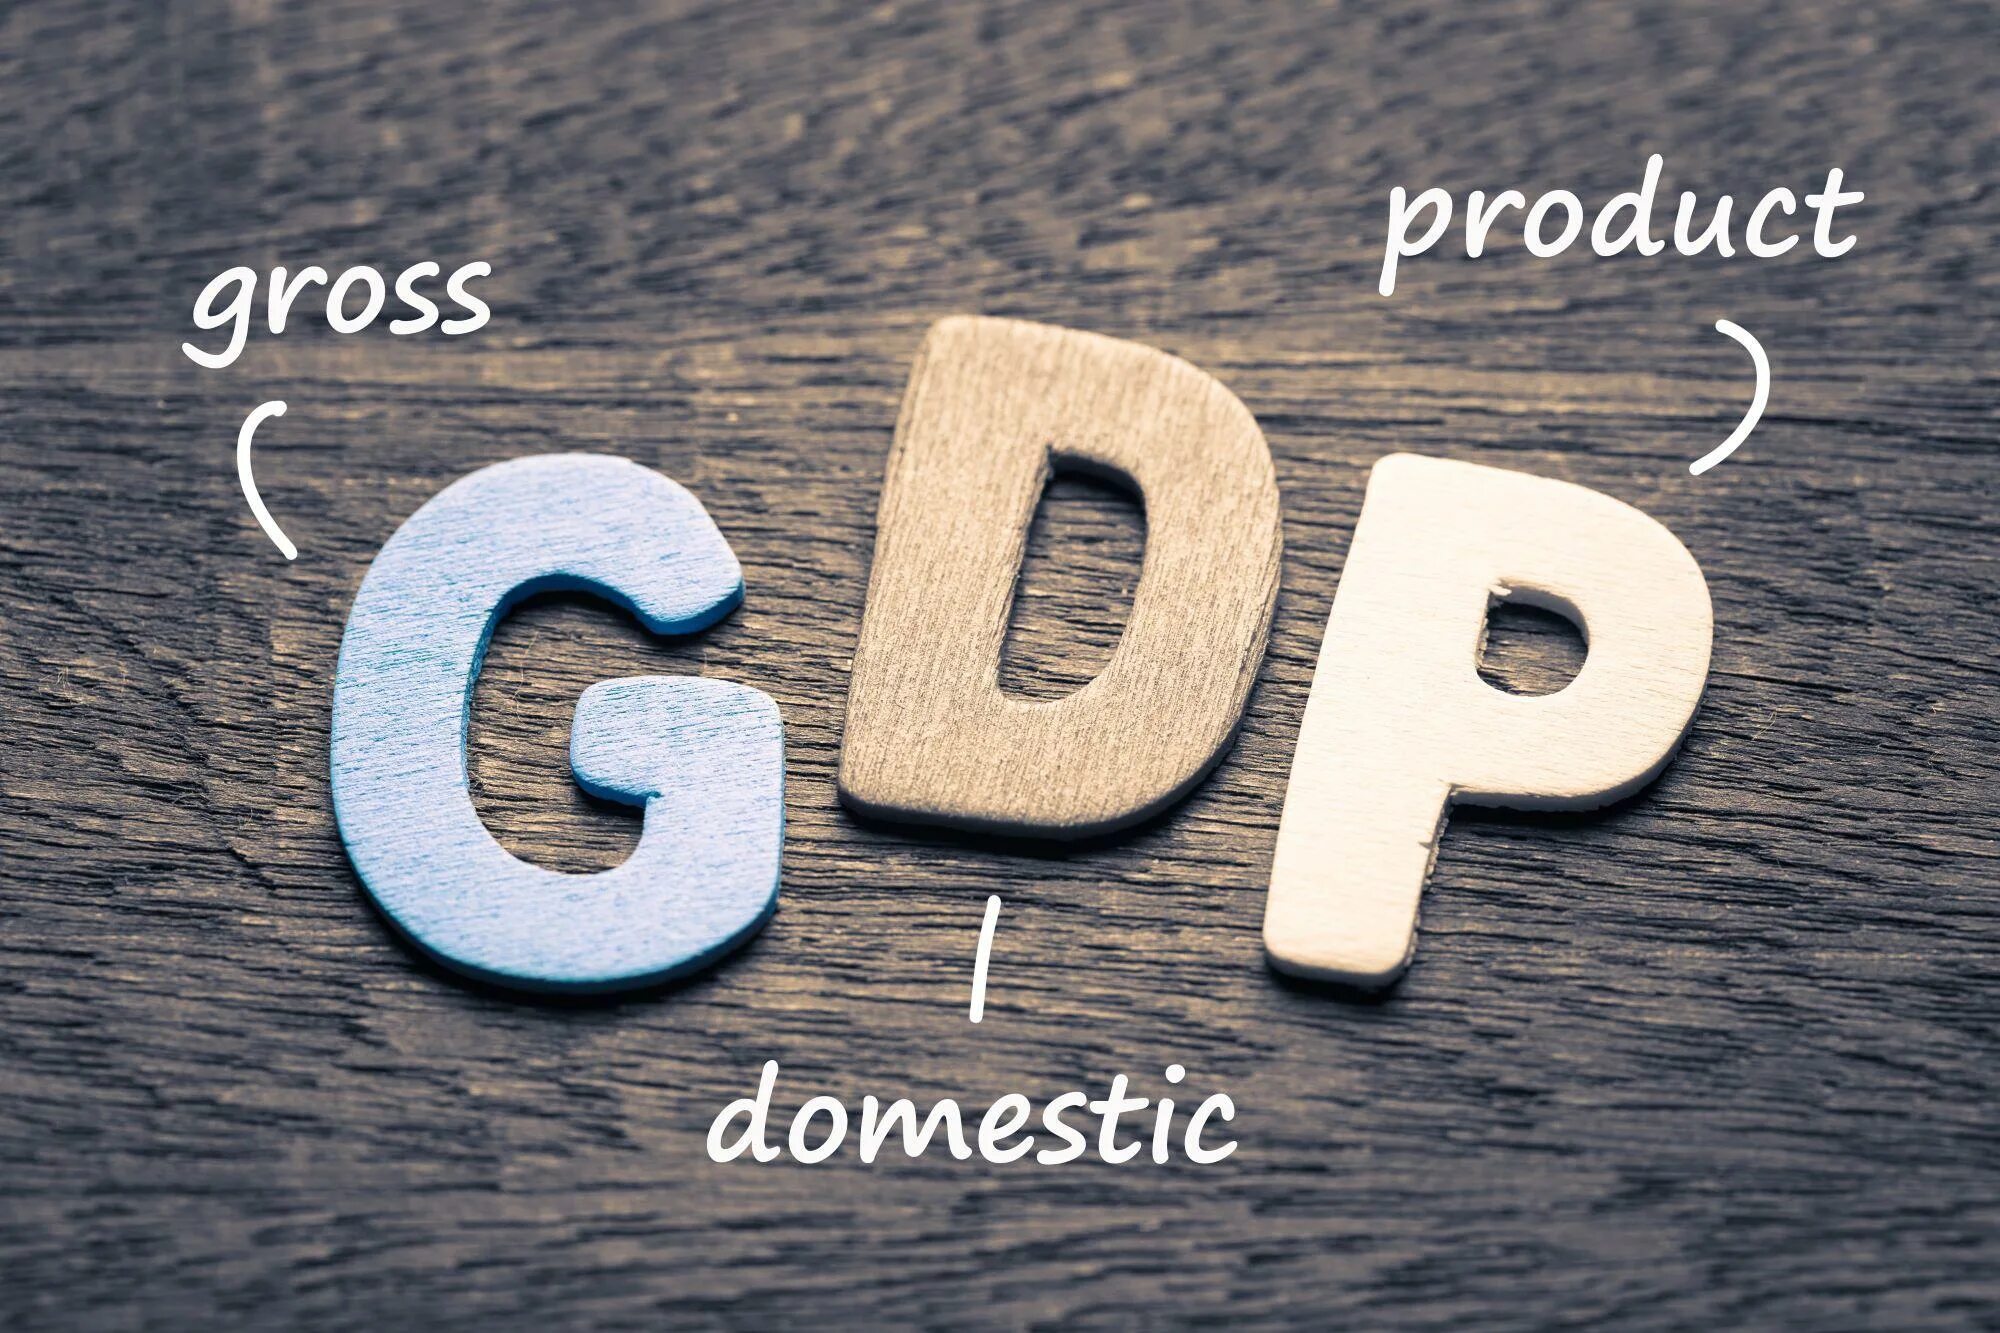 Gross domestic product. GDP. GDP картинки. GDP значок.